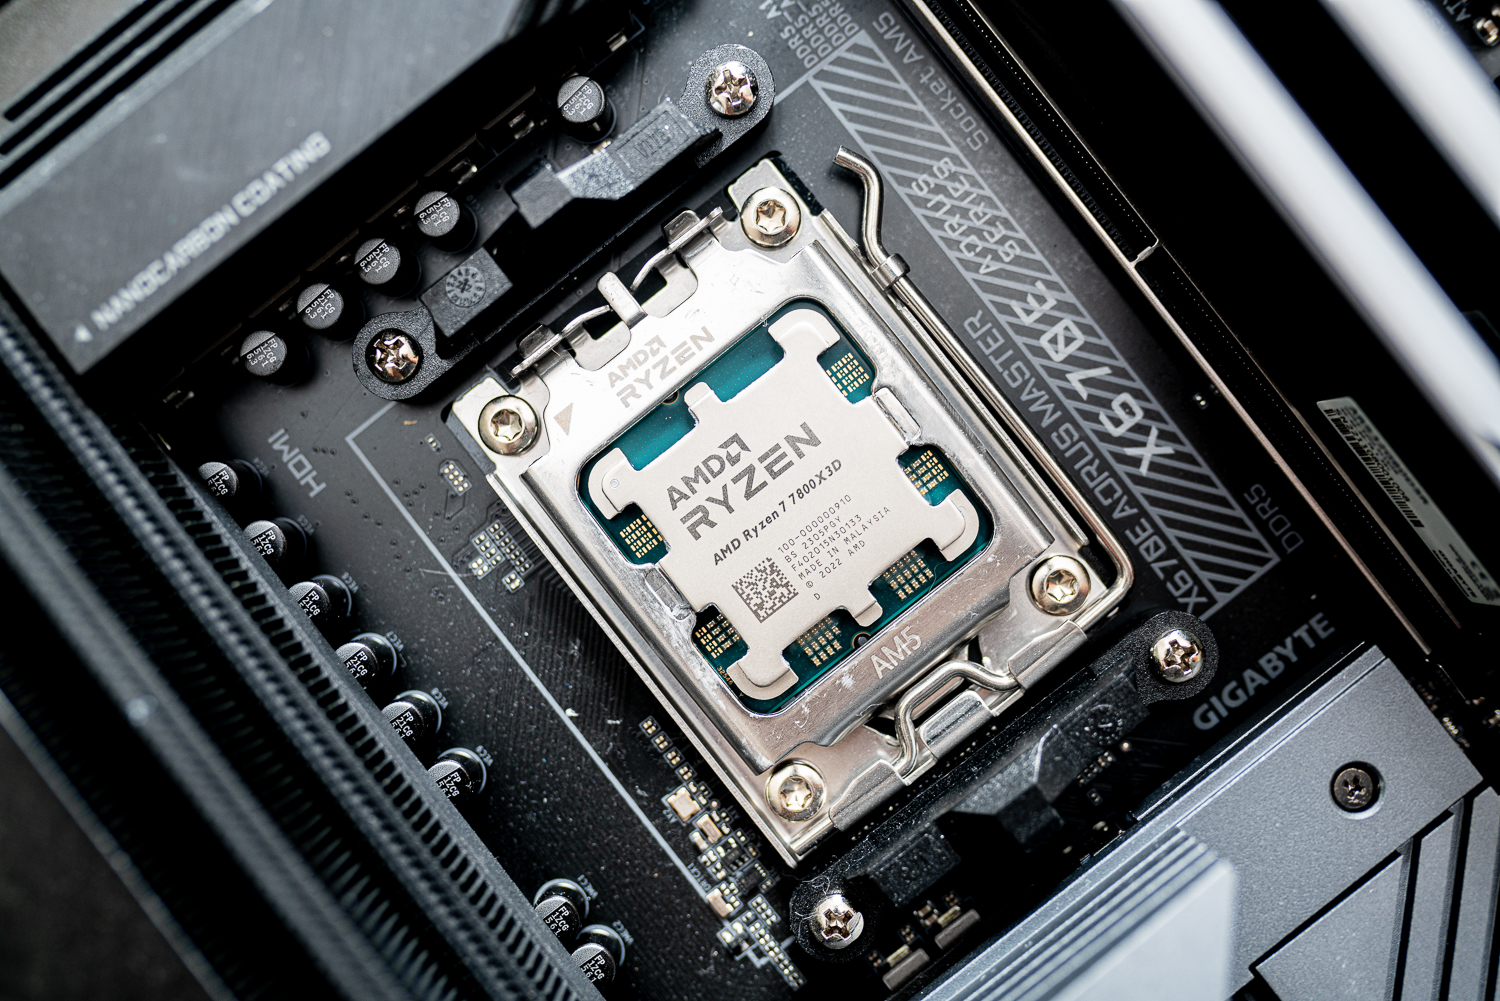 Intel's Core i5 is the best bargain in CPUs right now, but which should you  get?